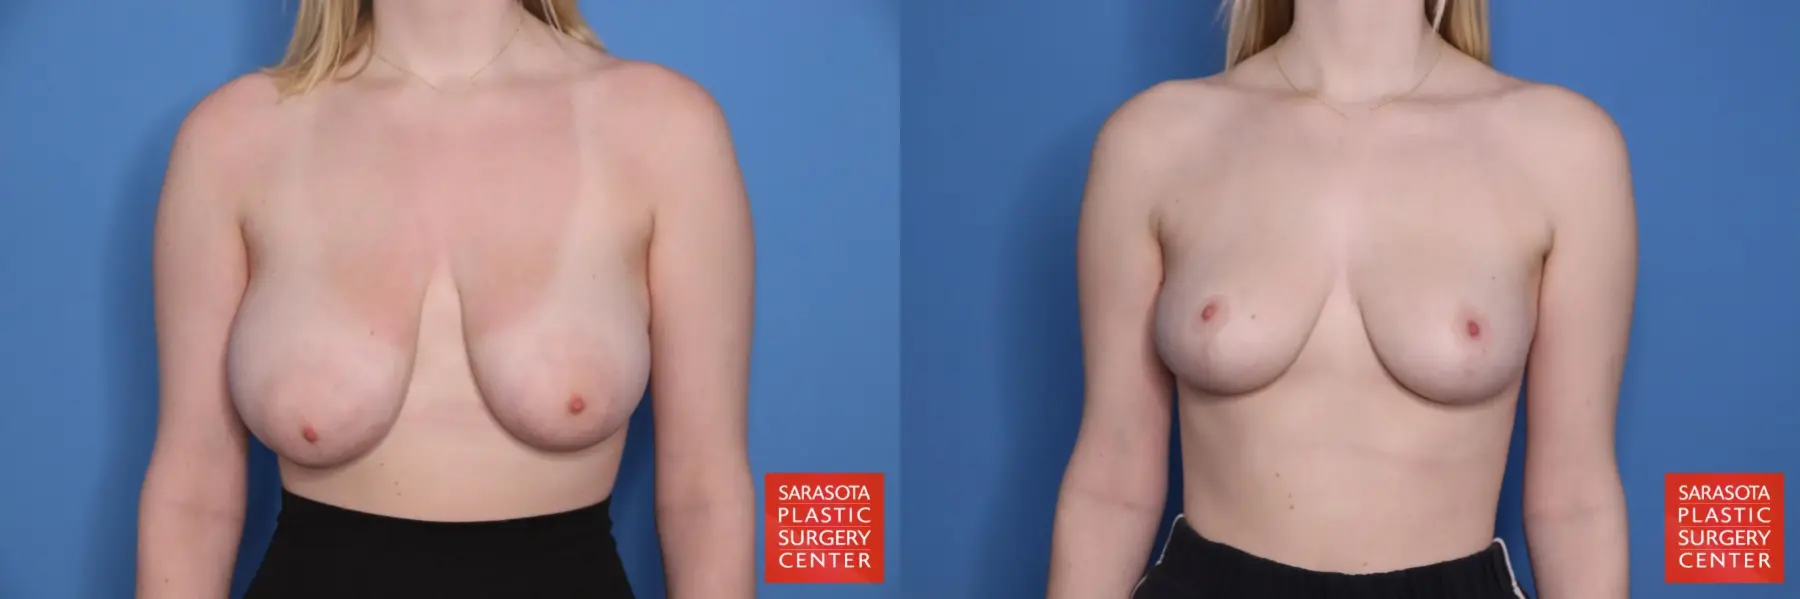 Breast Lift: Patient 9 - Before and After  